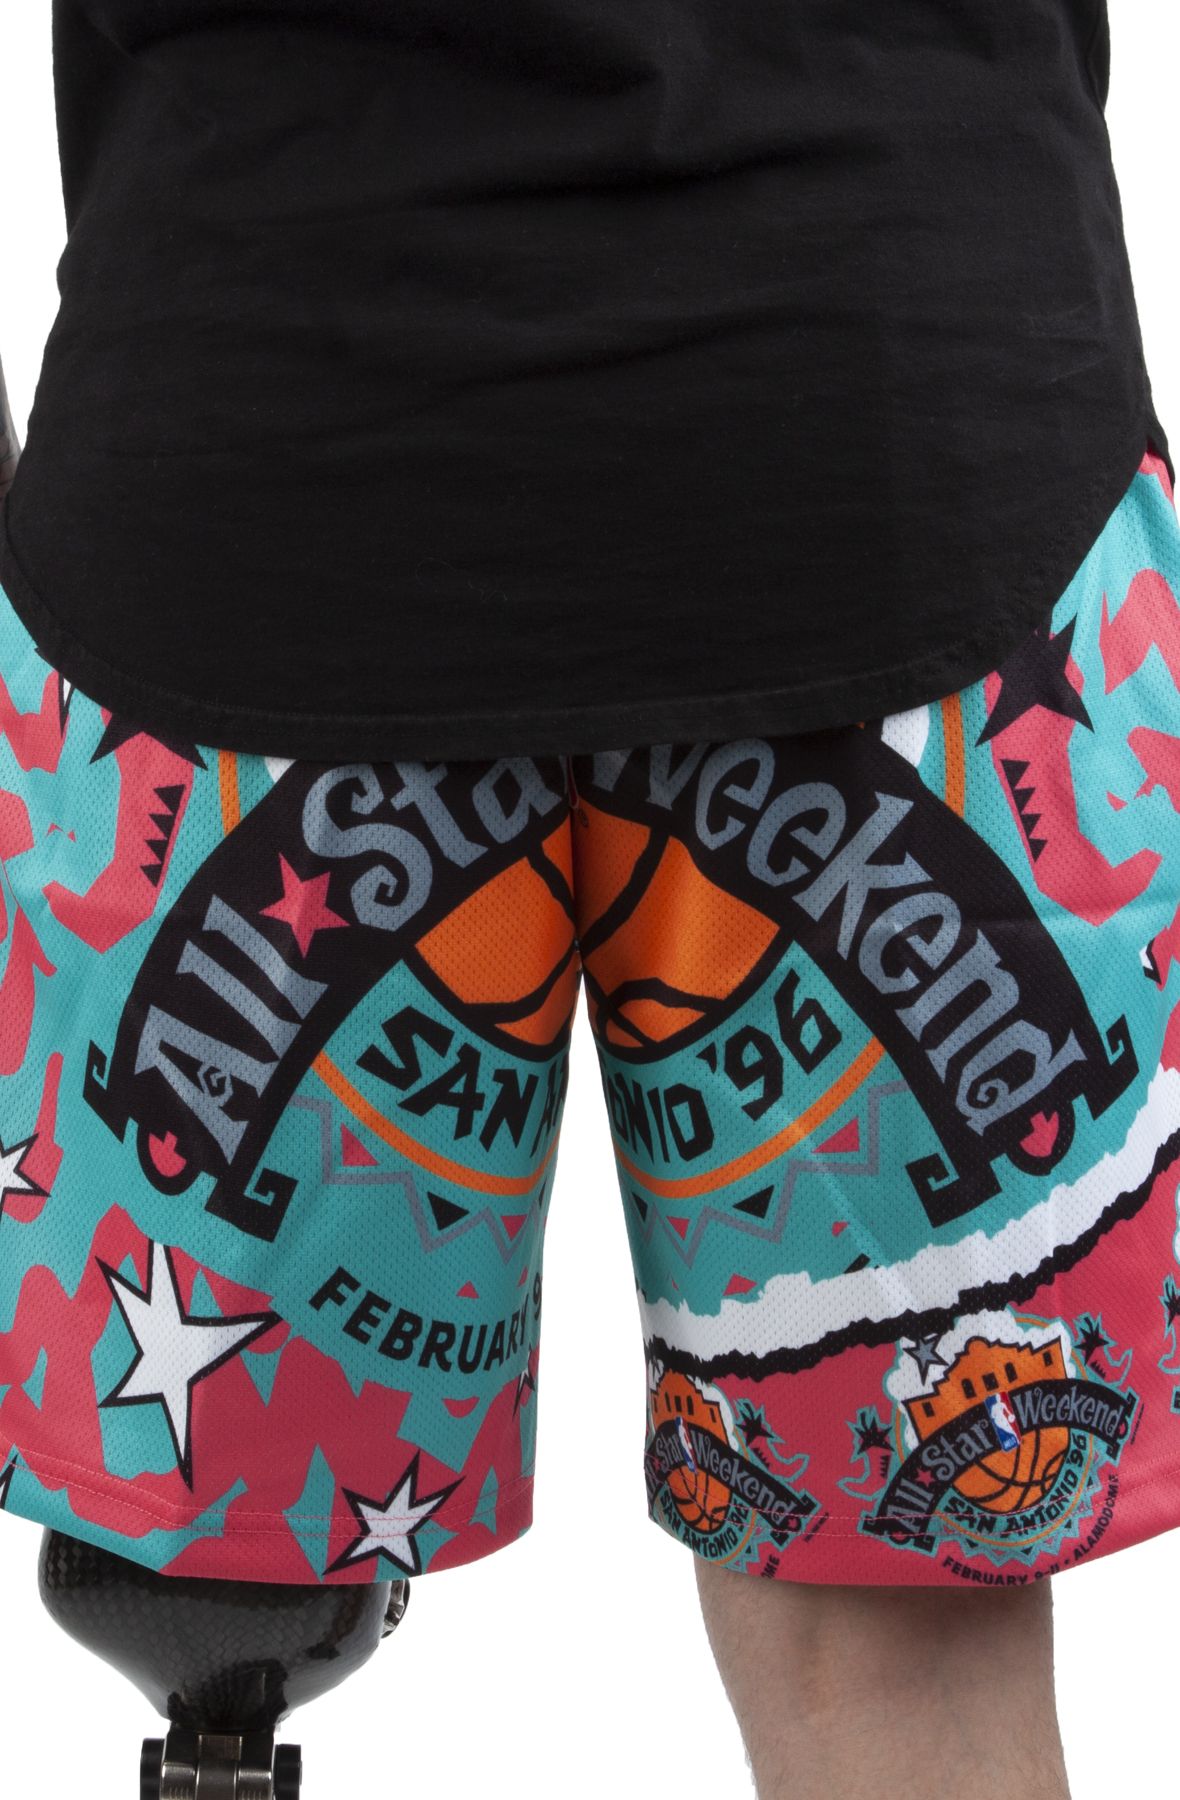 Jumbotron 2.0 Sublimated Shorts All Star 1996-97 - Shop Mitchell & Ness  Shorts and Pants Mitchell & Ness Nostalgia Co.